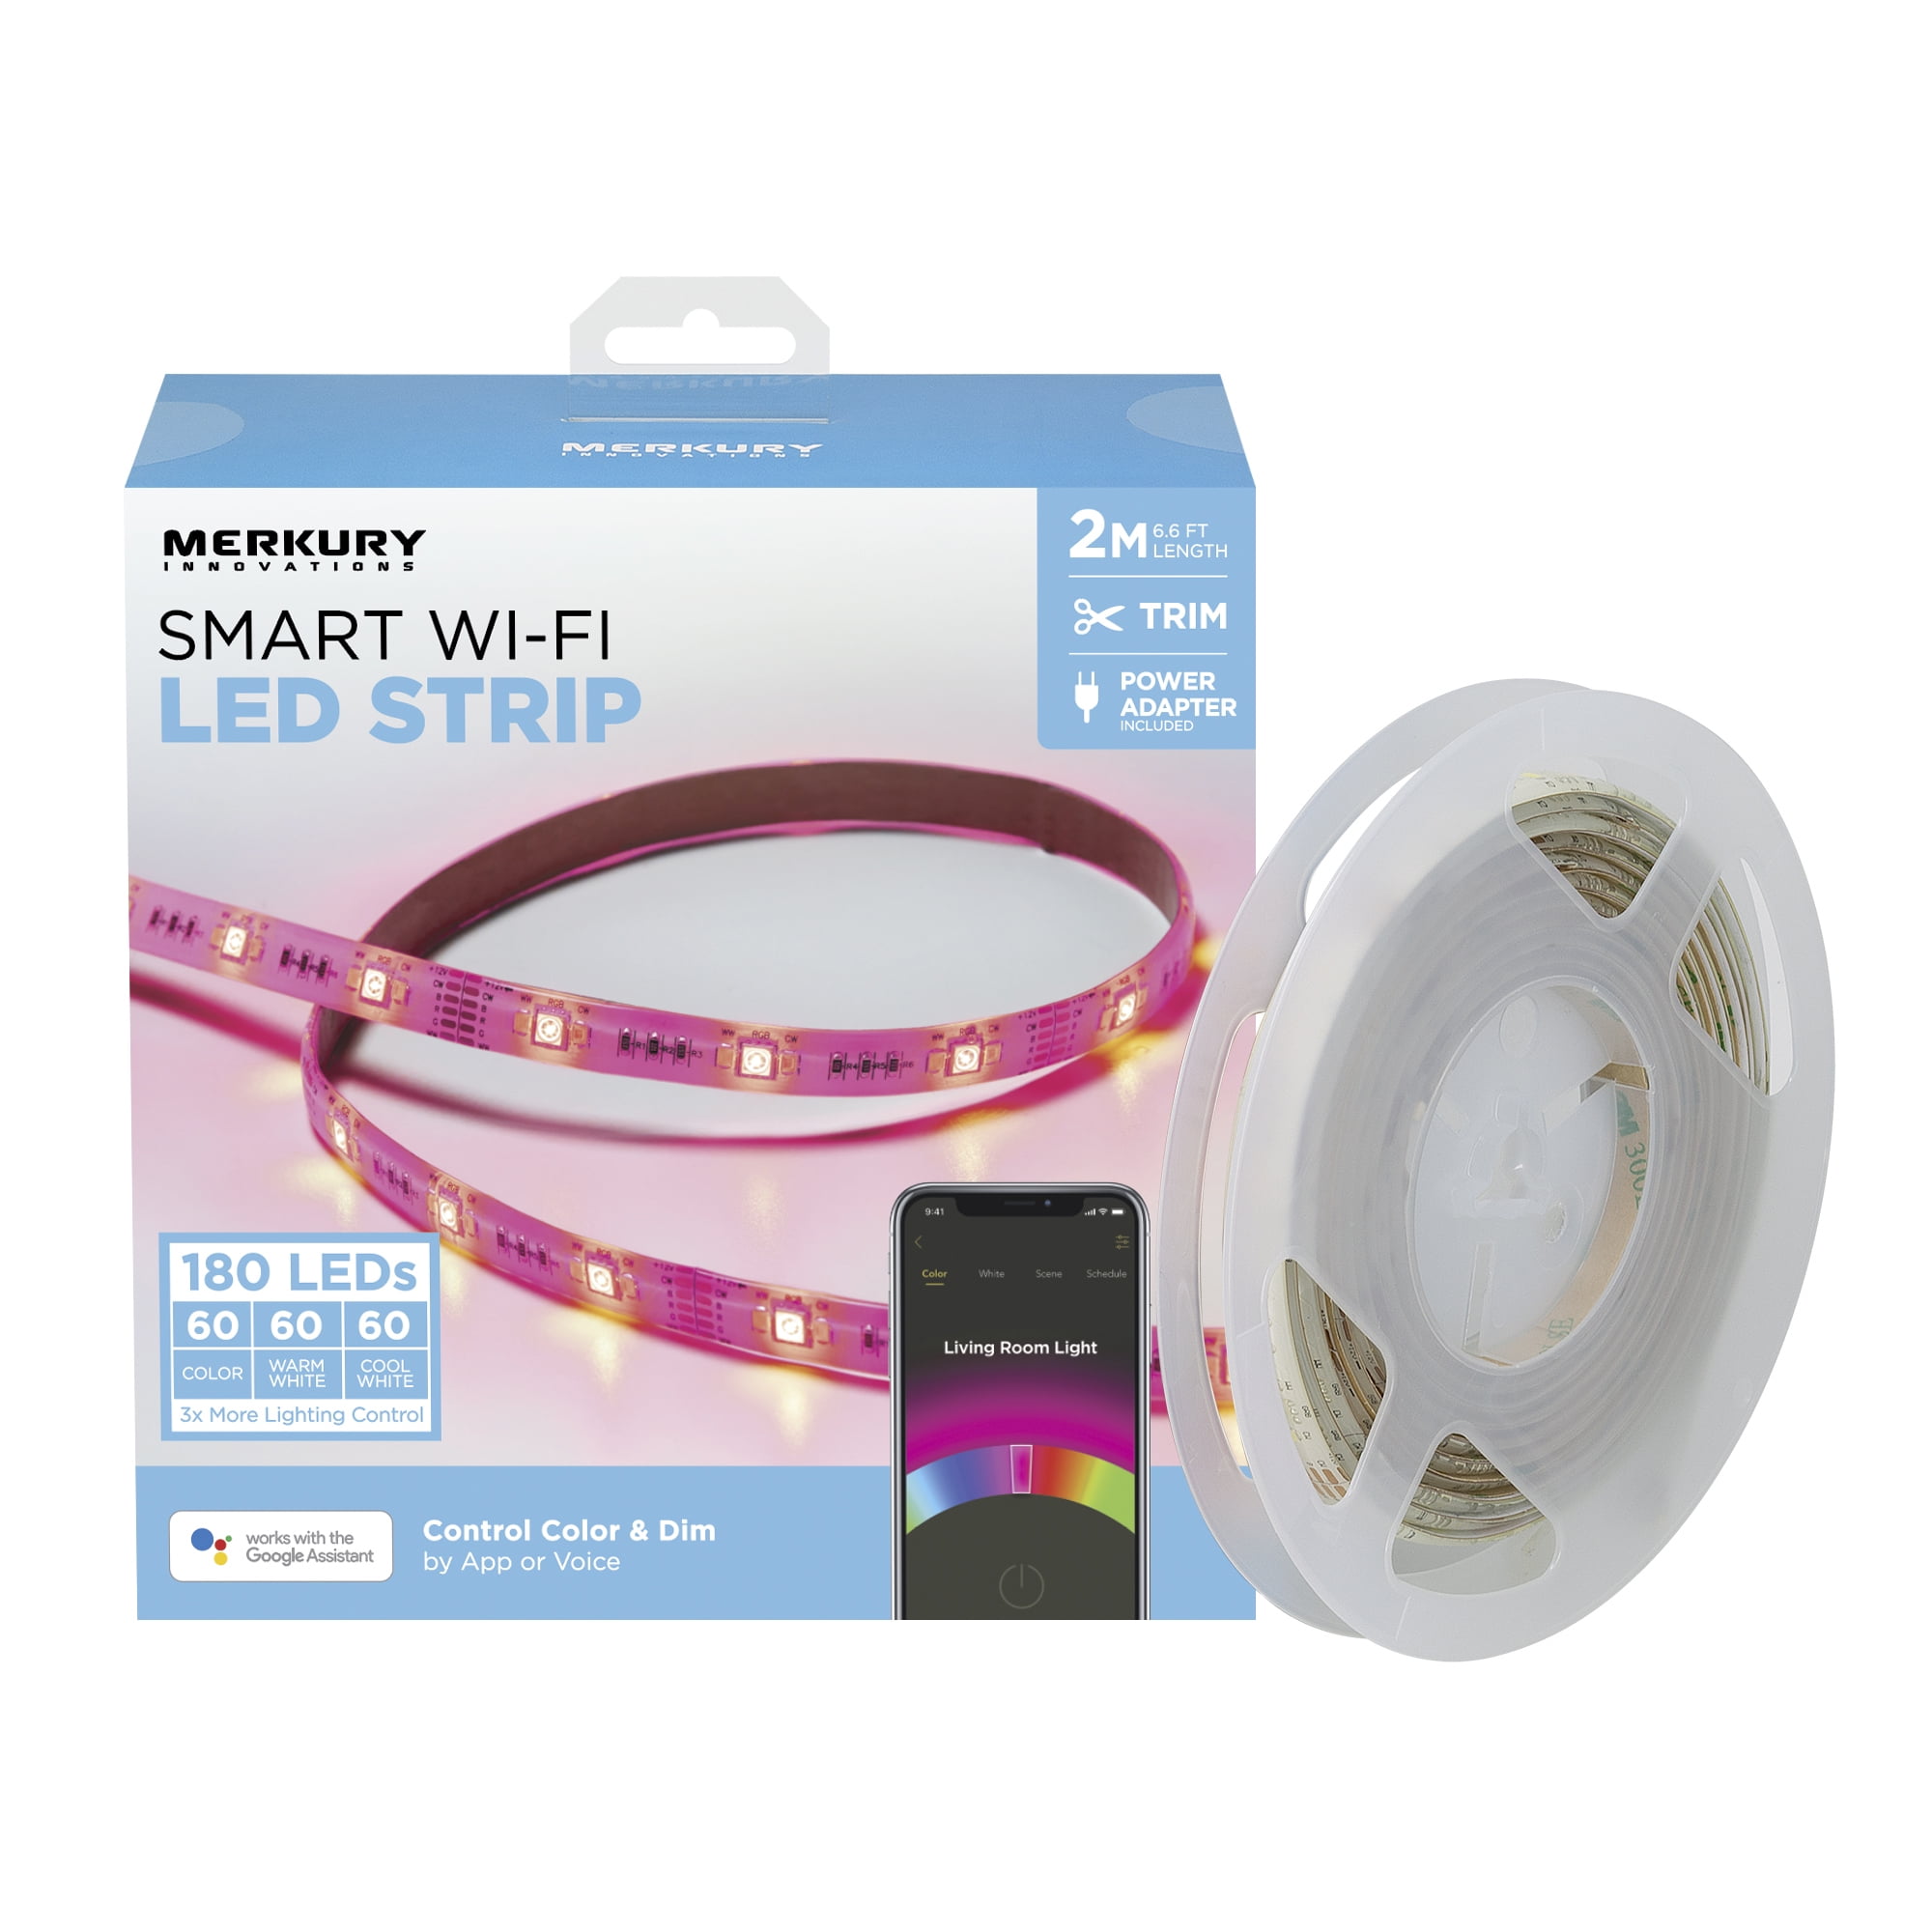 Trimmable, Merkury Dimmable Lights, Strip Smart 6.5ft, Innovations LED